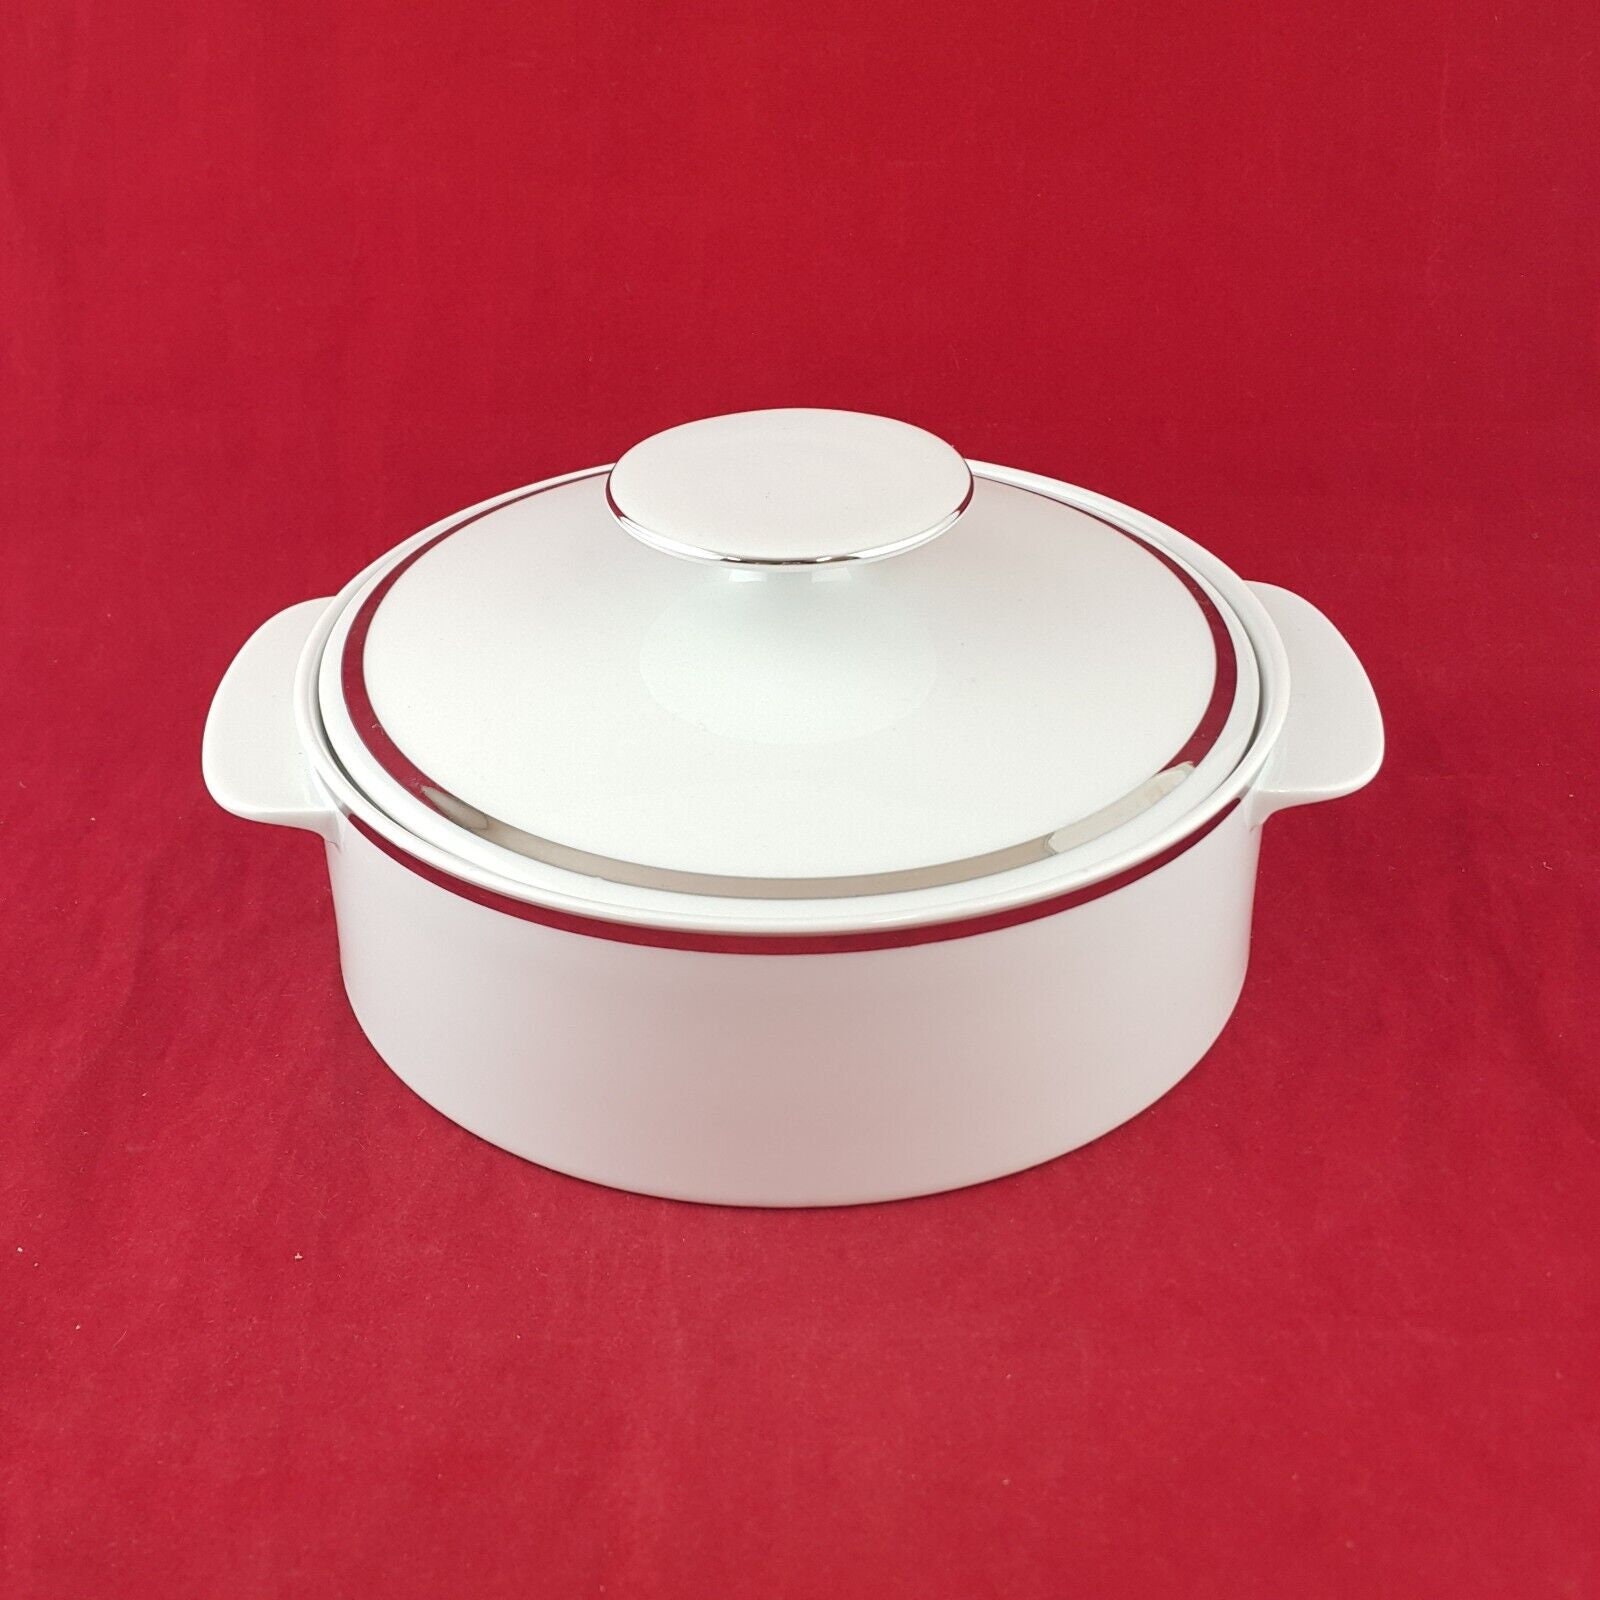 Thomas Rosenthal Germany White With Sliver Band Tureen With Lid 7075 OA 